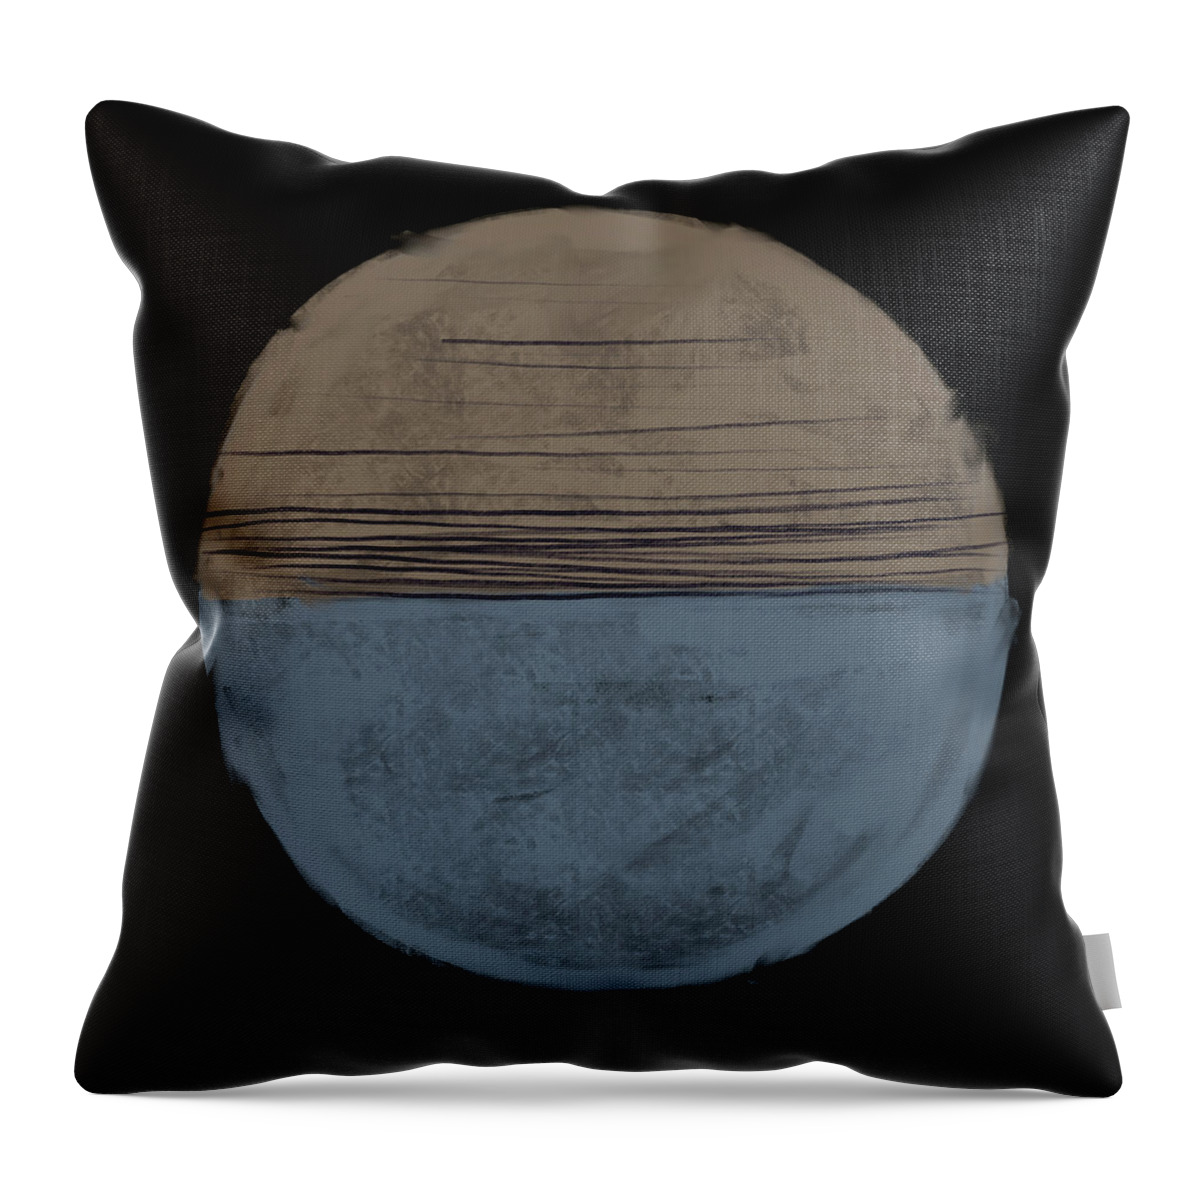 Abstract Throw Pillow featuring the digital art Minimal Abstract Painting with a Split Circle - No2 by Studio Grafiikka